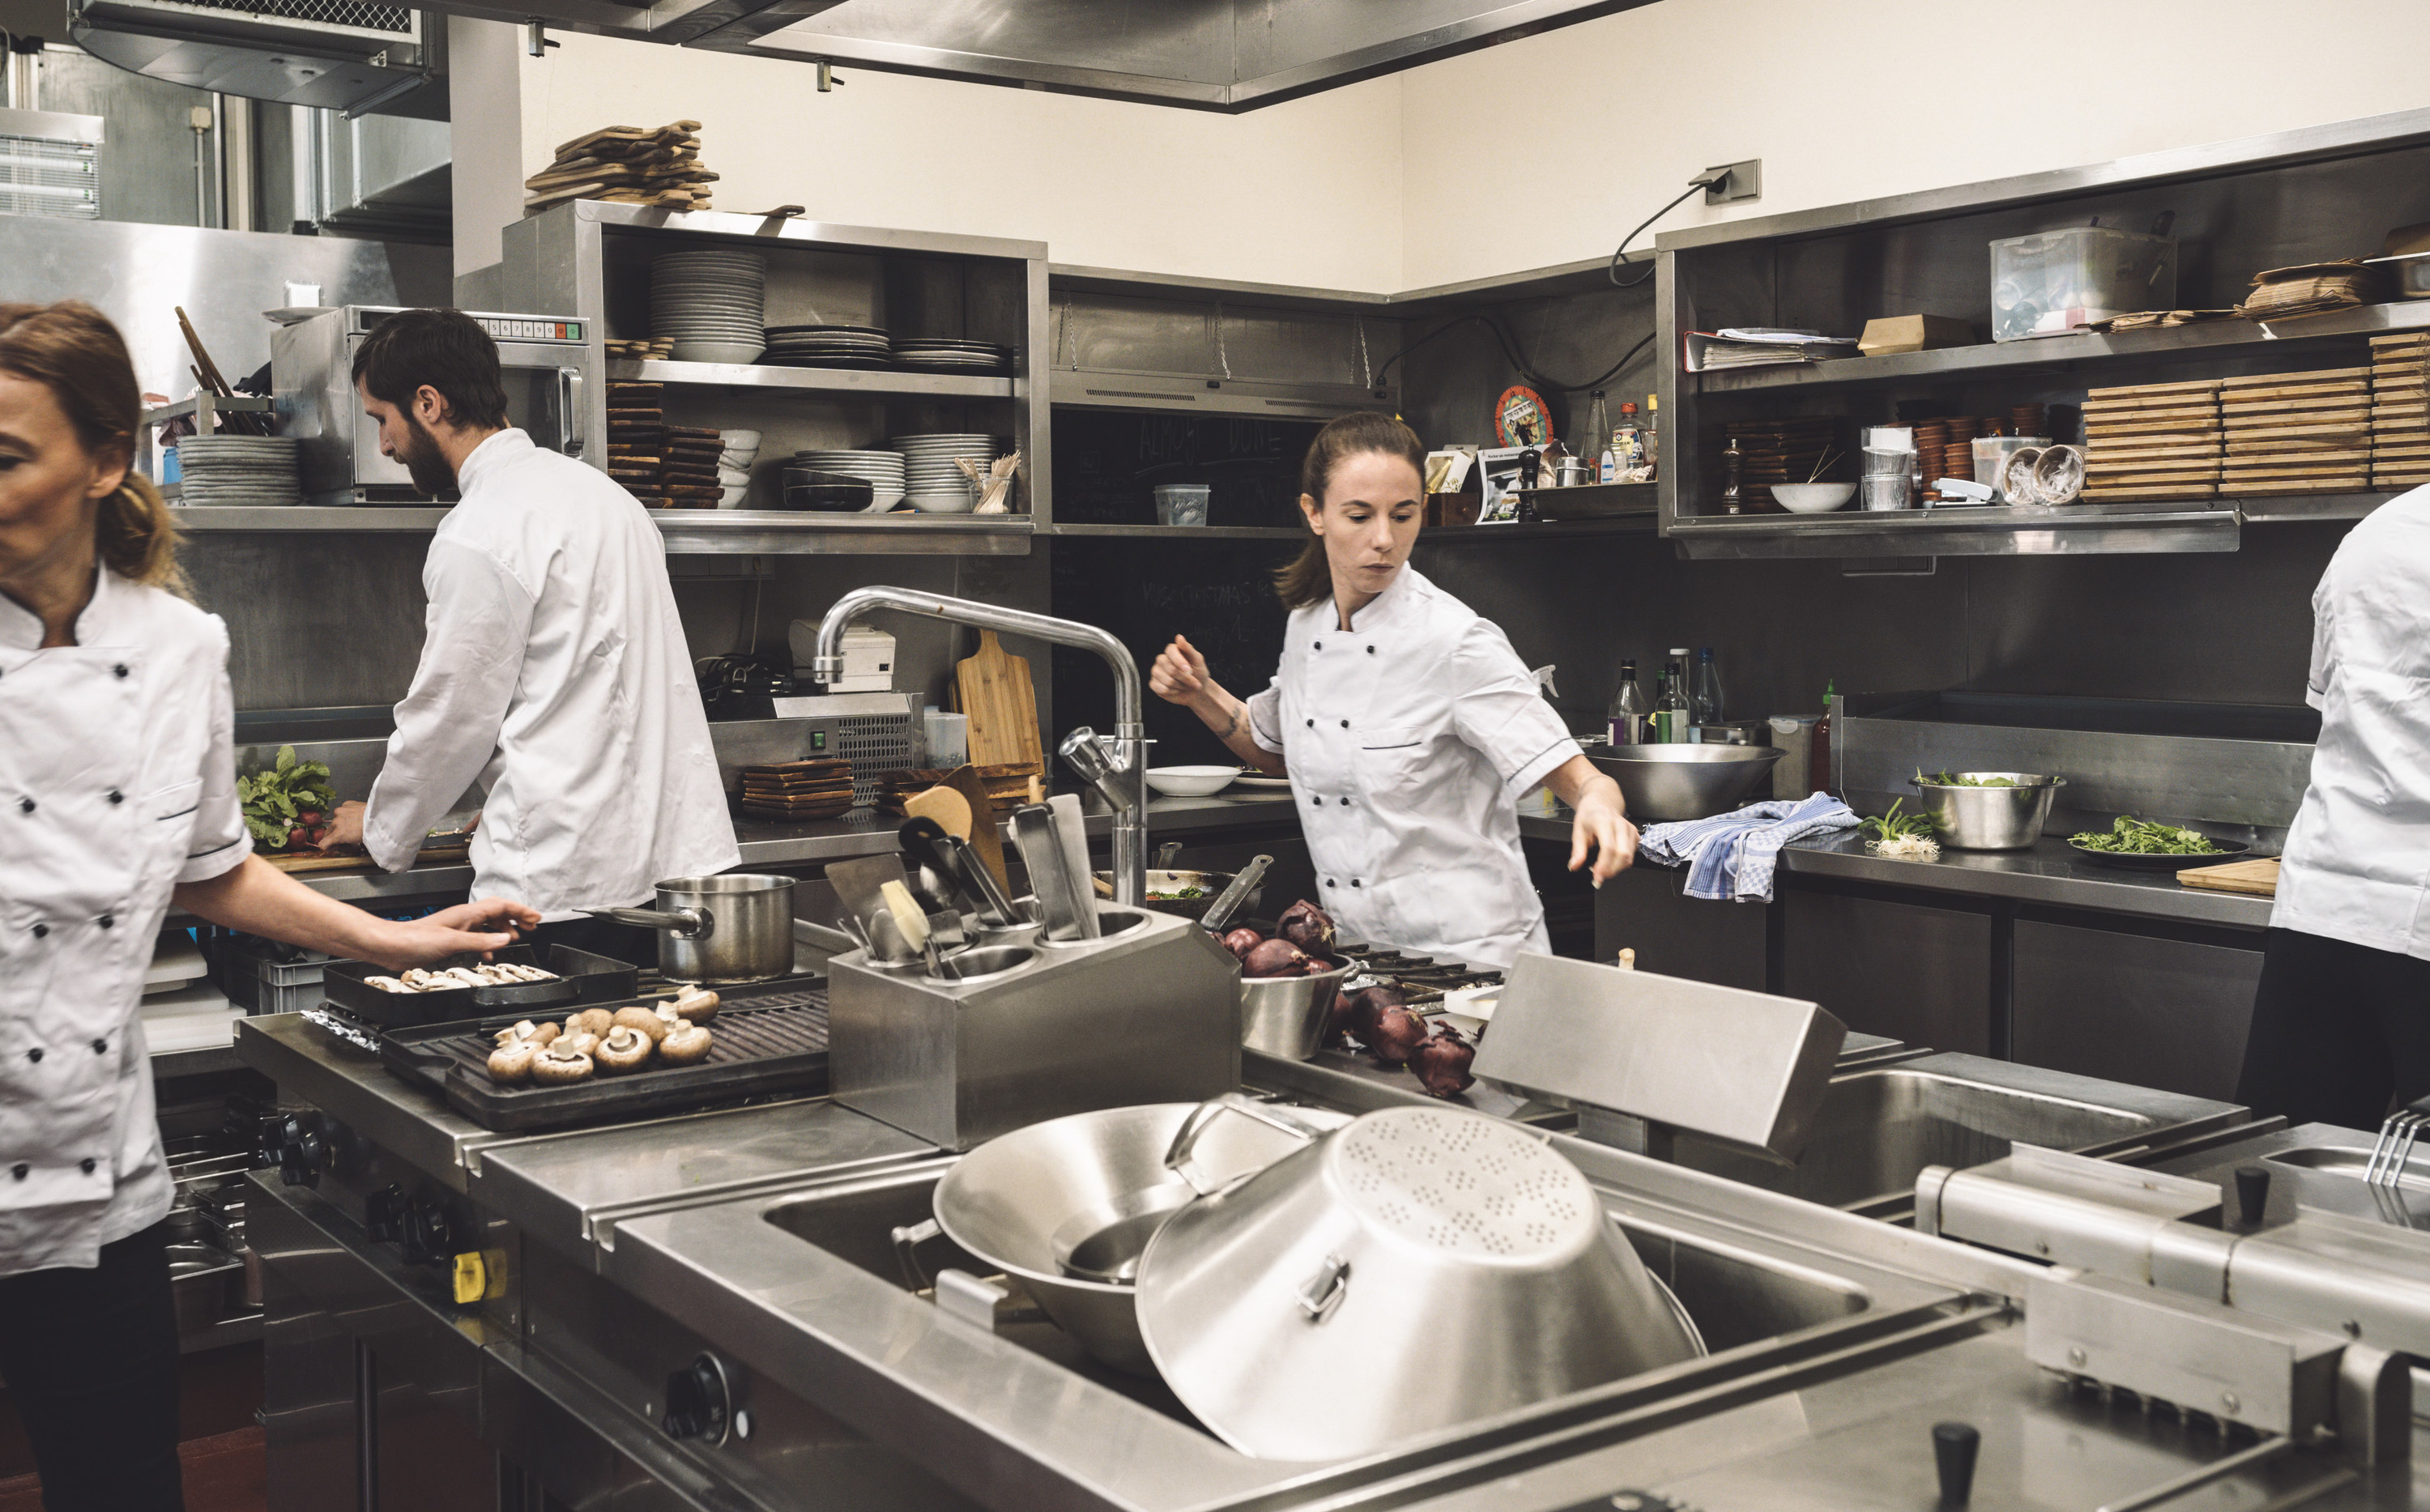 Chefs in restaurant kitchen, moving quickly and busily